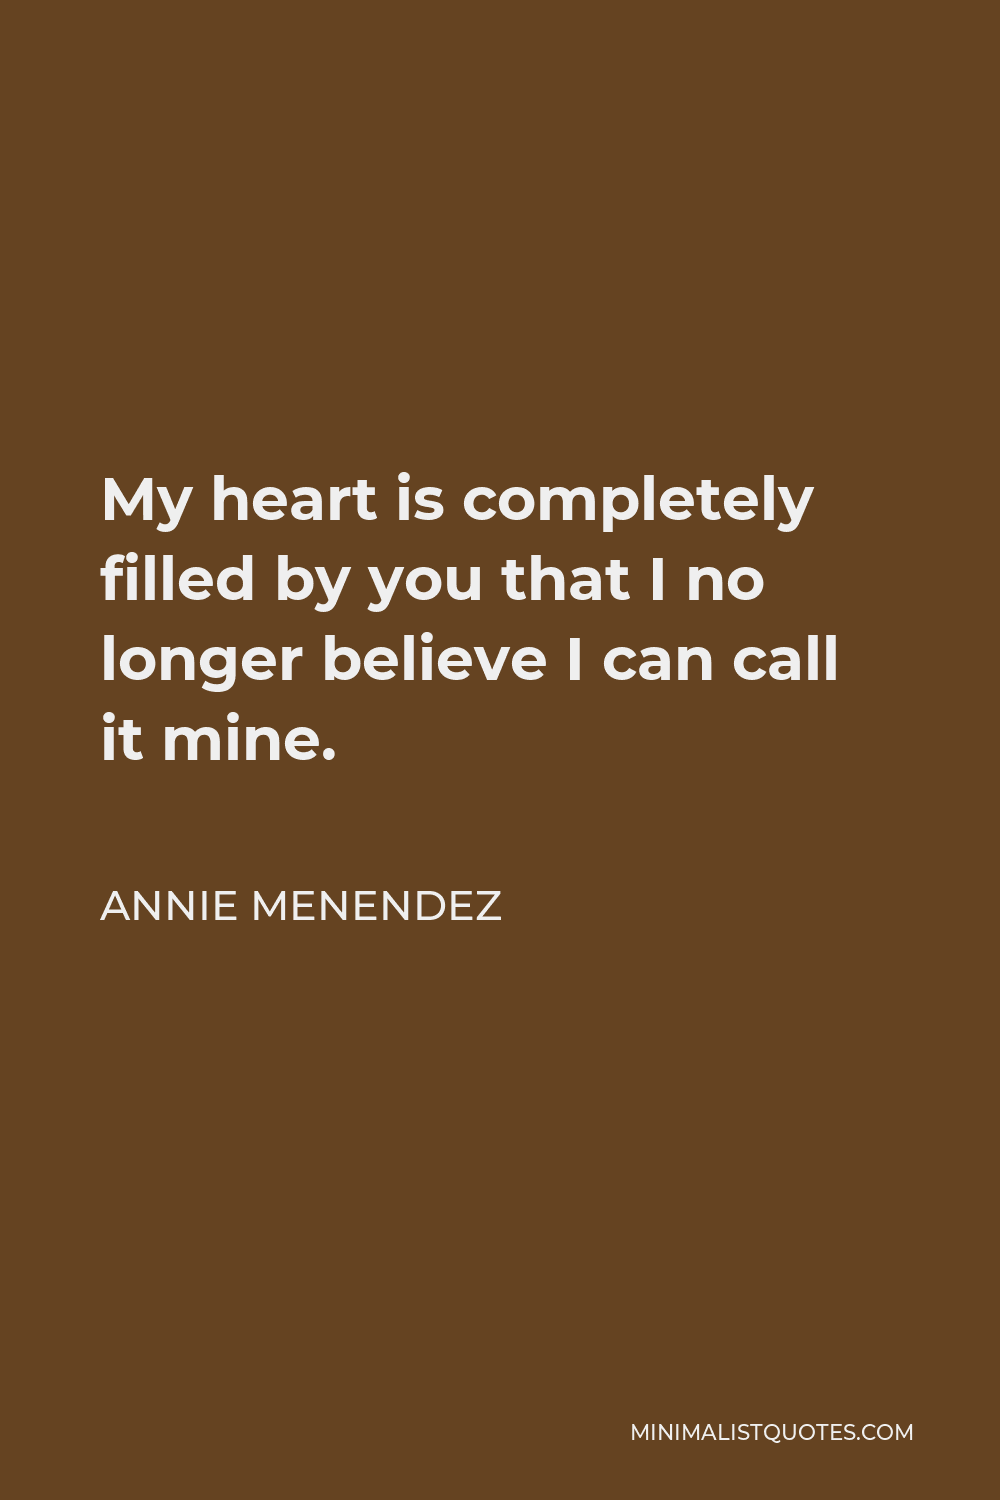 Annie Menendez Quote - My heart is completely filled by you that I no longer believe I can call it mine.